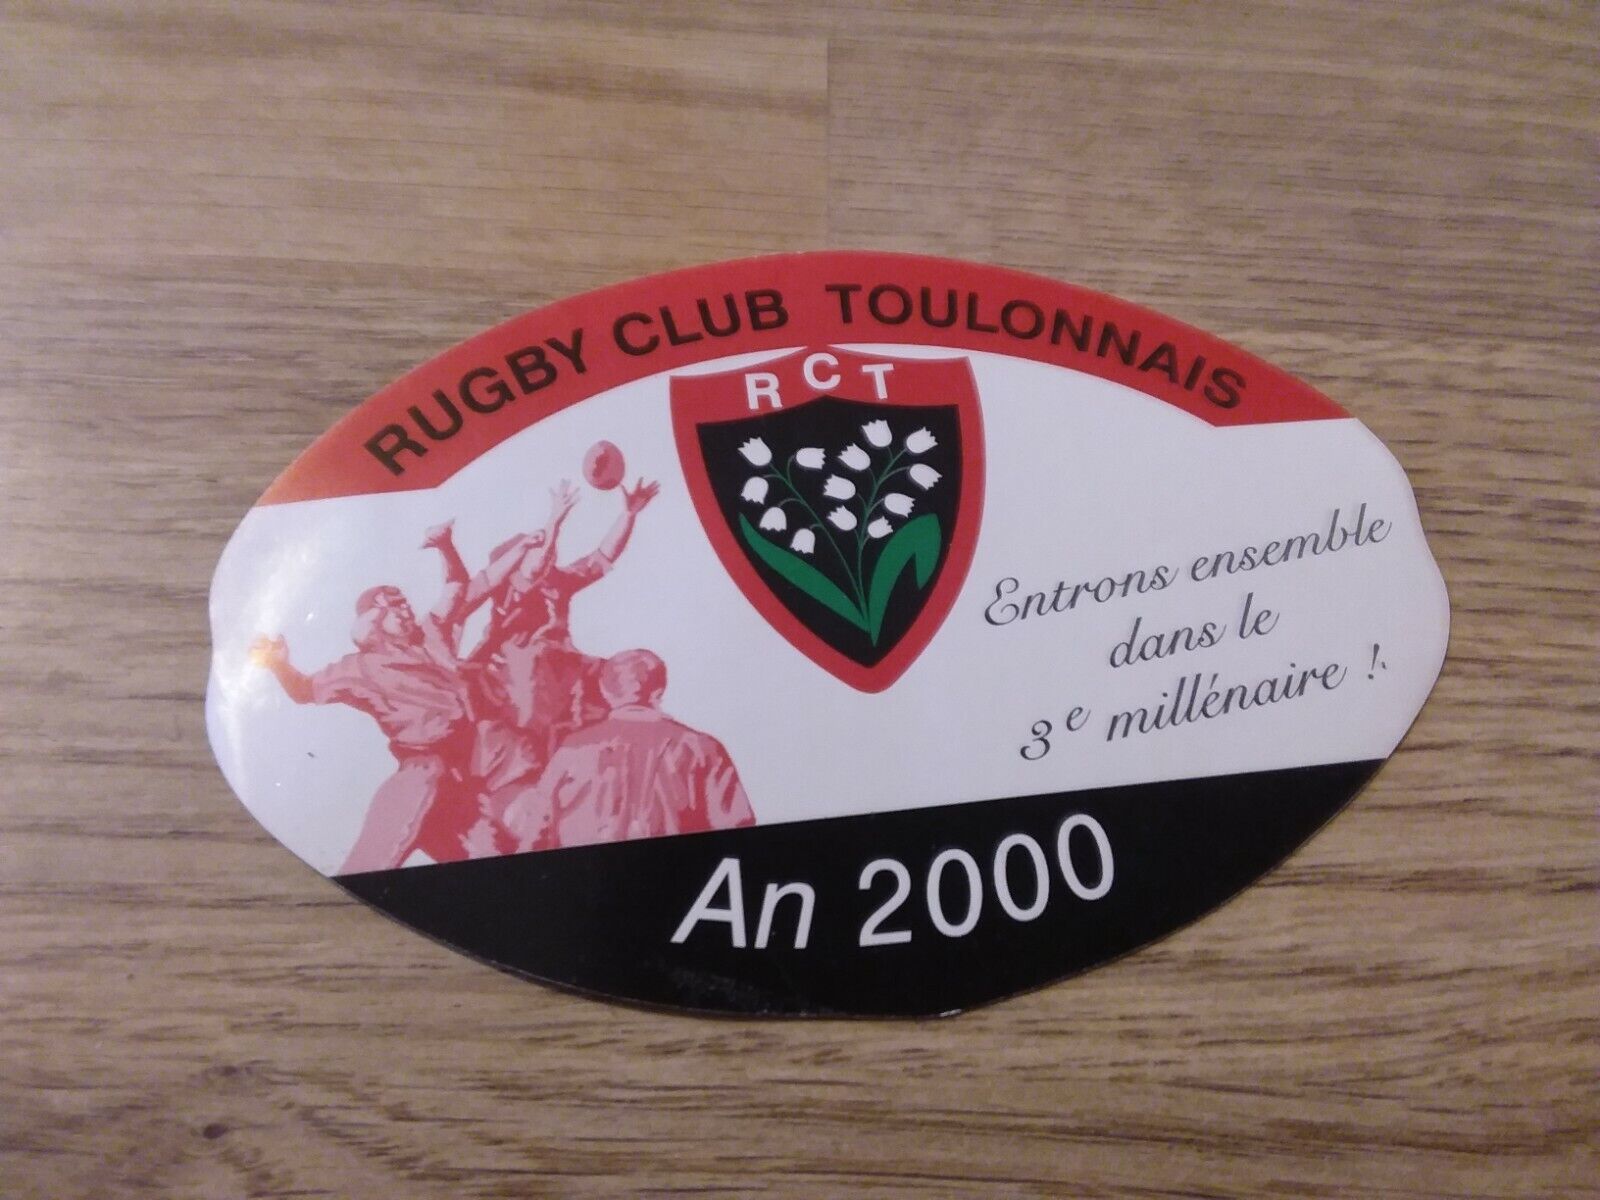 Antique vintage RCT rugby club Toulon year 2000 stickers